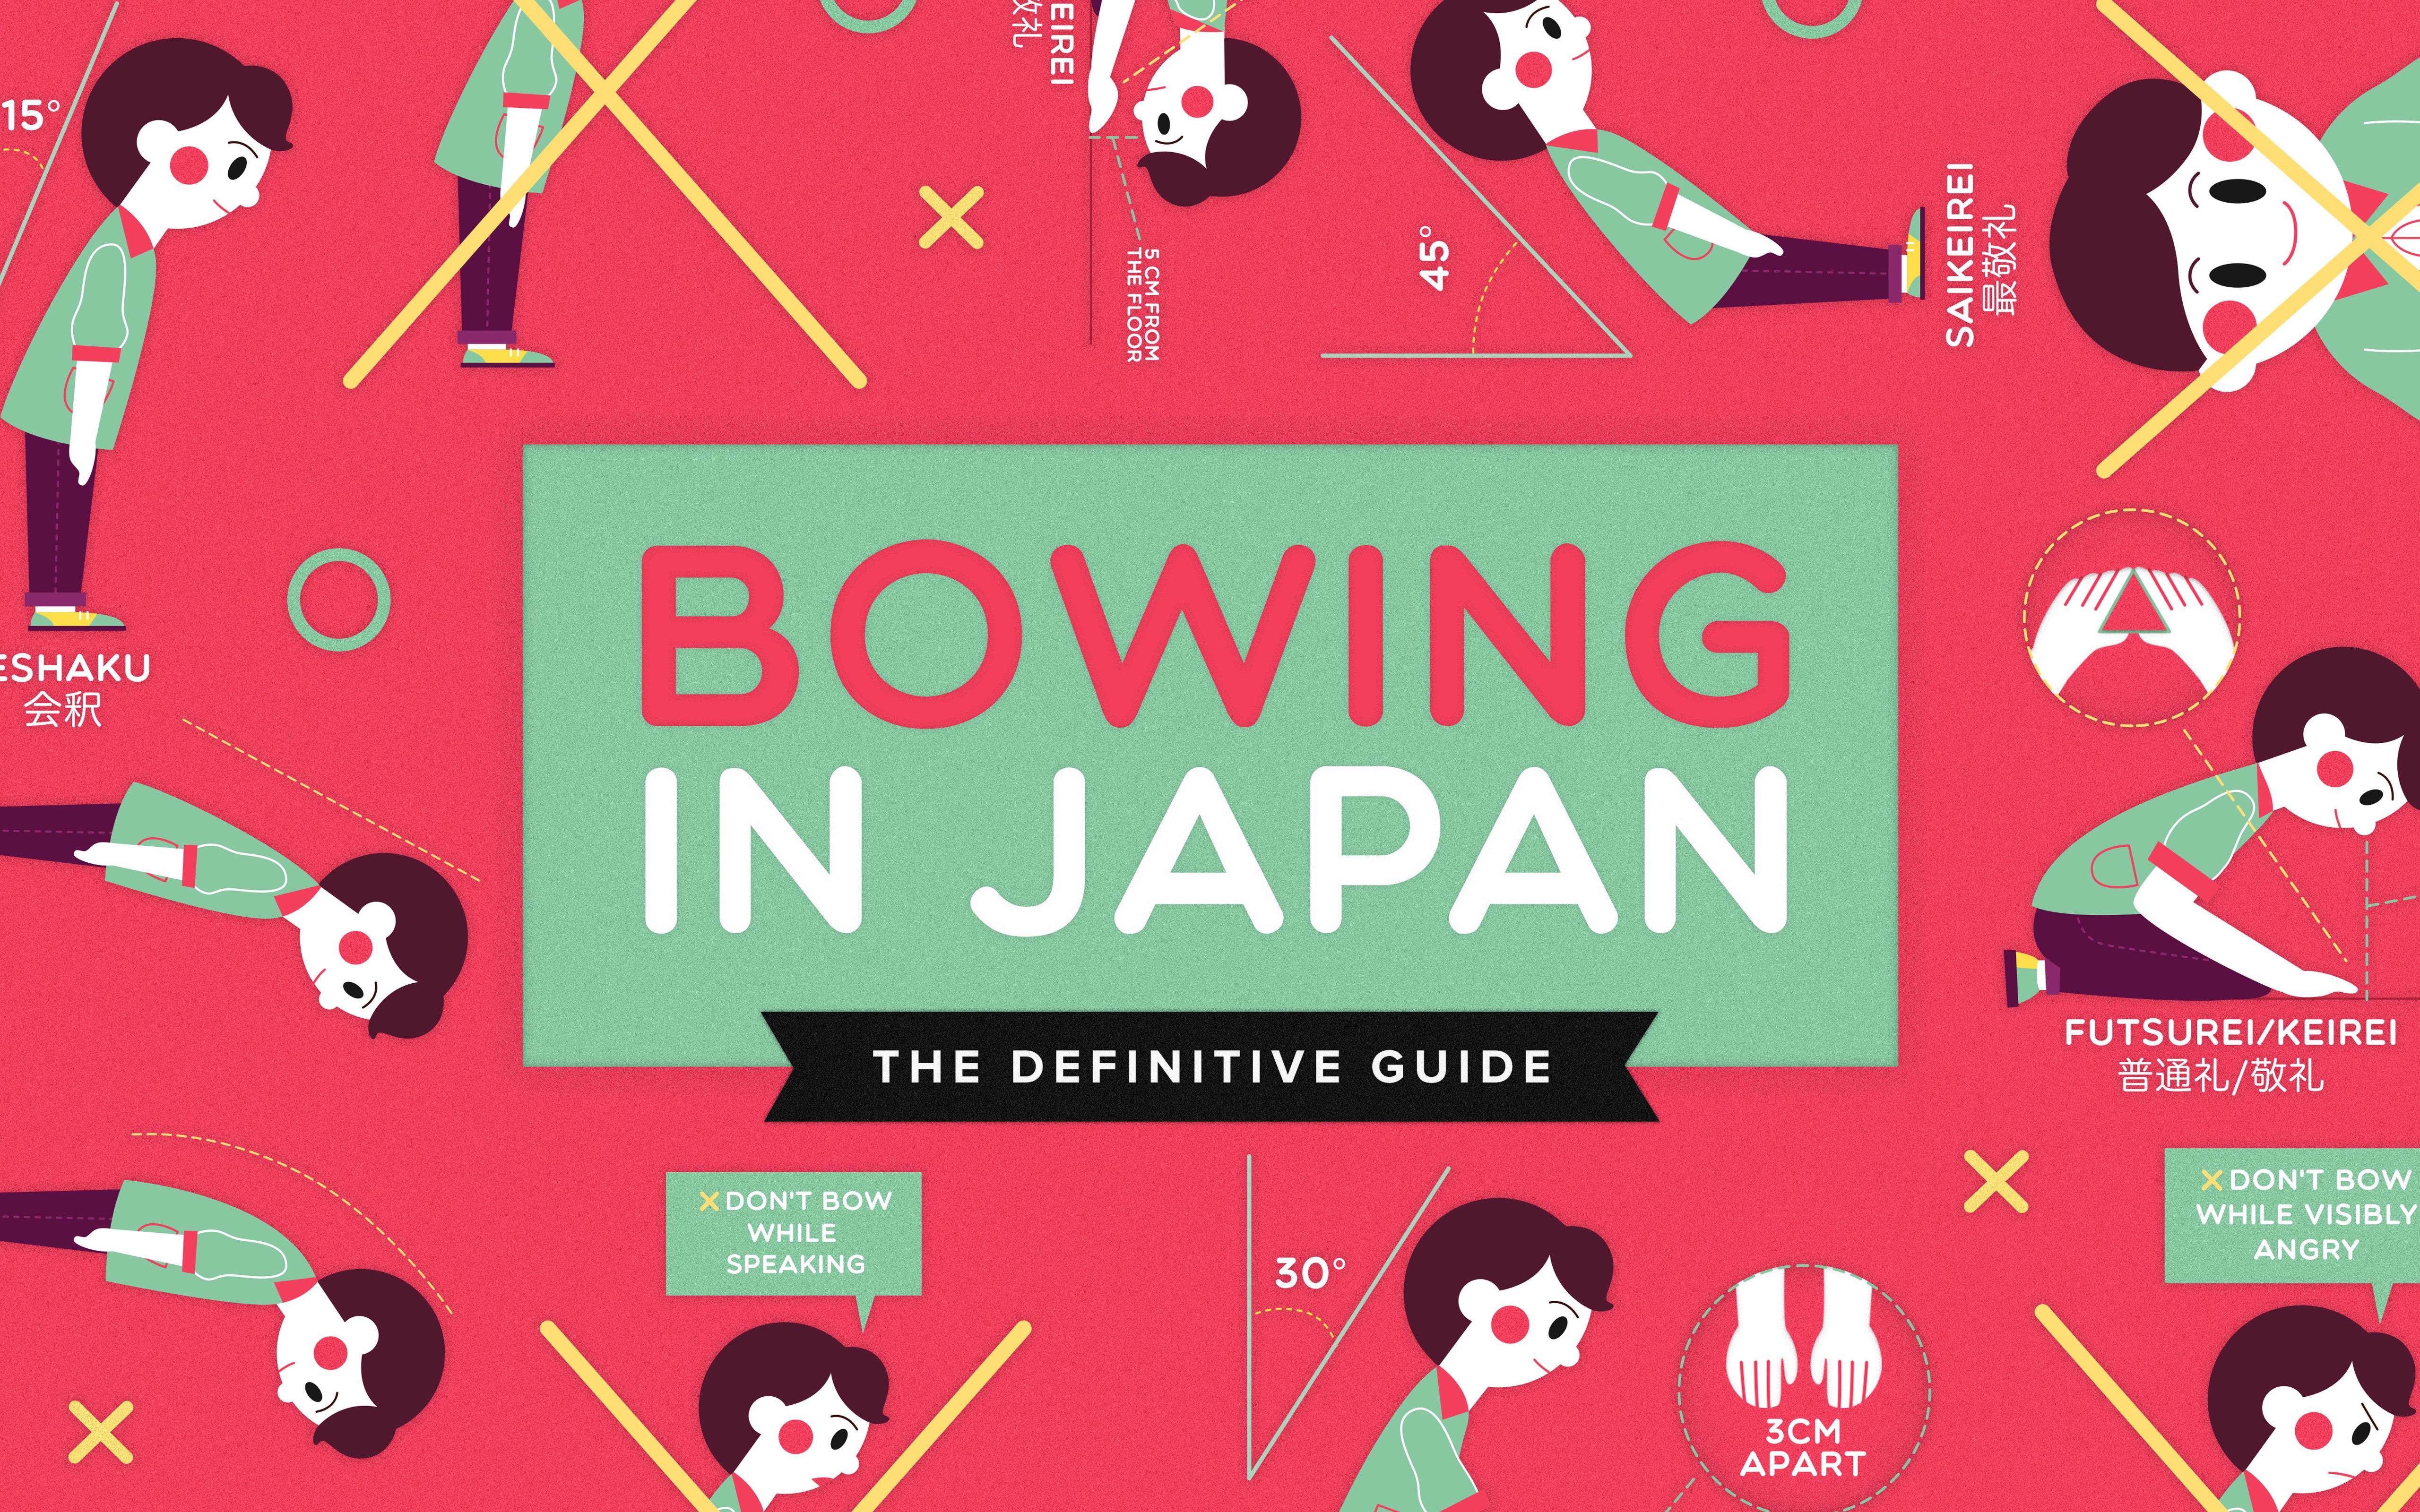 Japanese Bowing The Definitive Guide